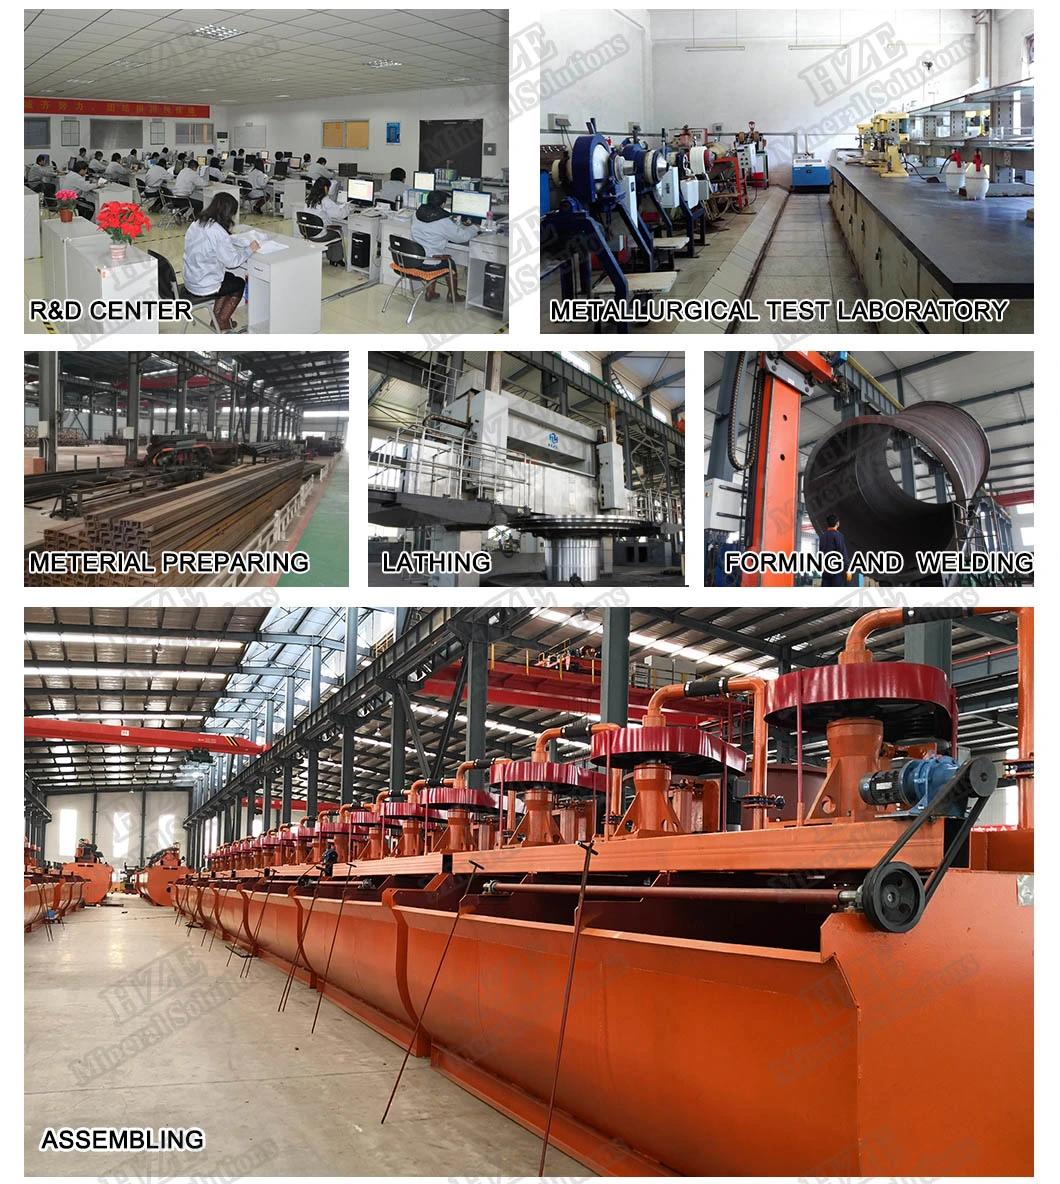 Beneficiation Recovery Equipment Self-aspirated Flotation Cell of Gold Processing Plant